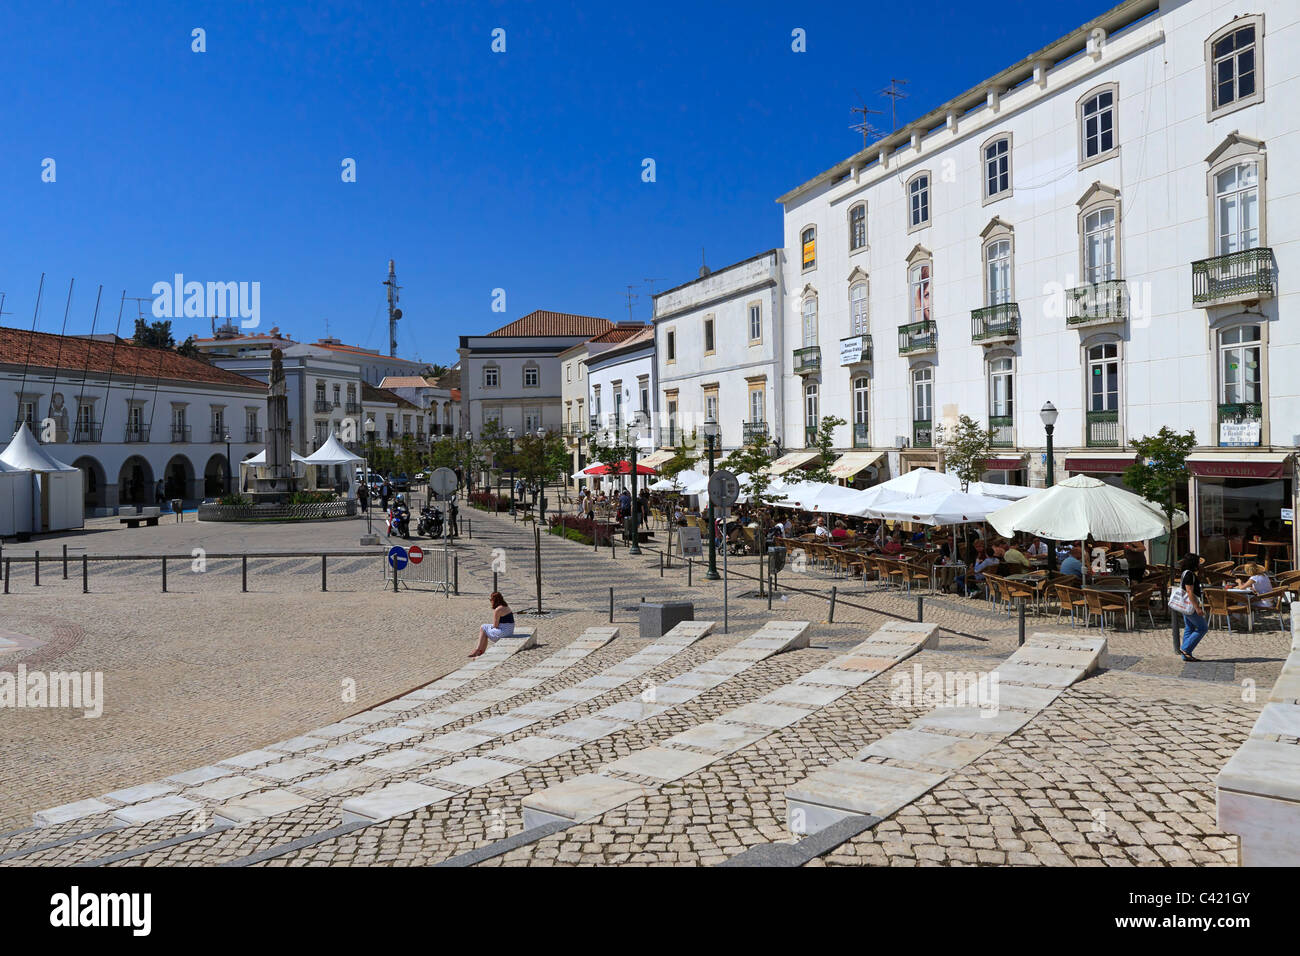 Praca da Republica, main public square in Tavira, Algarve, Portugal. The square is lined with shops and cafes. Stock Photo